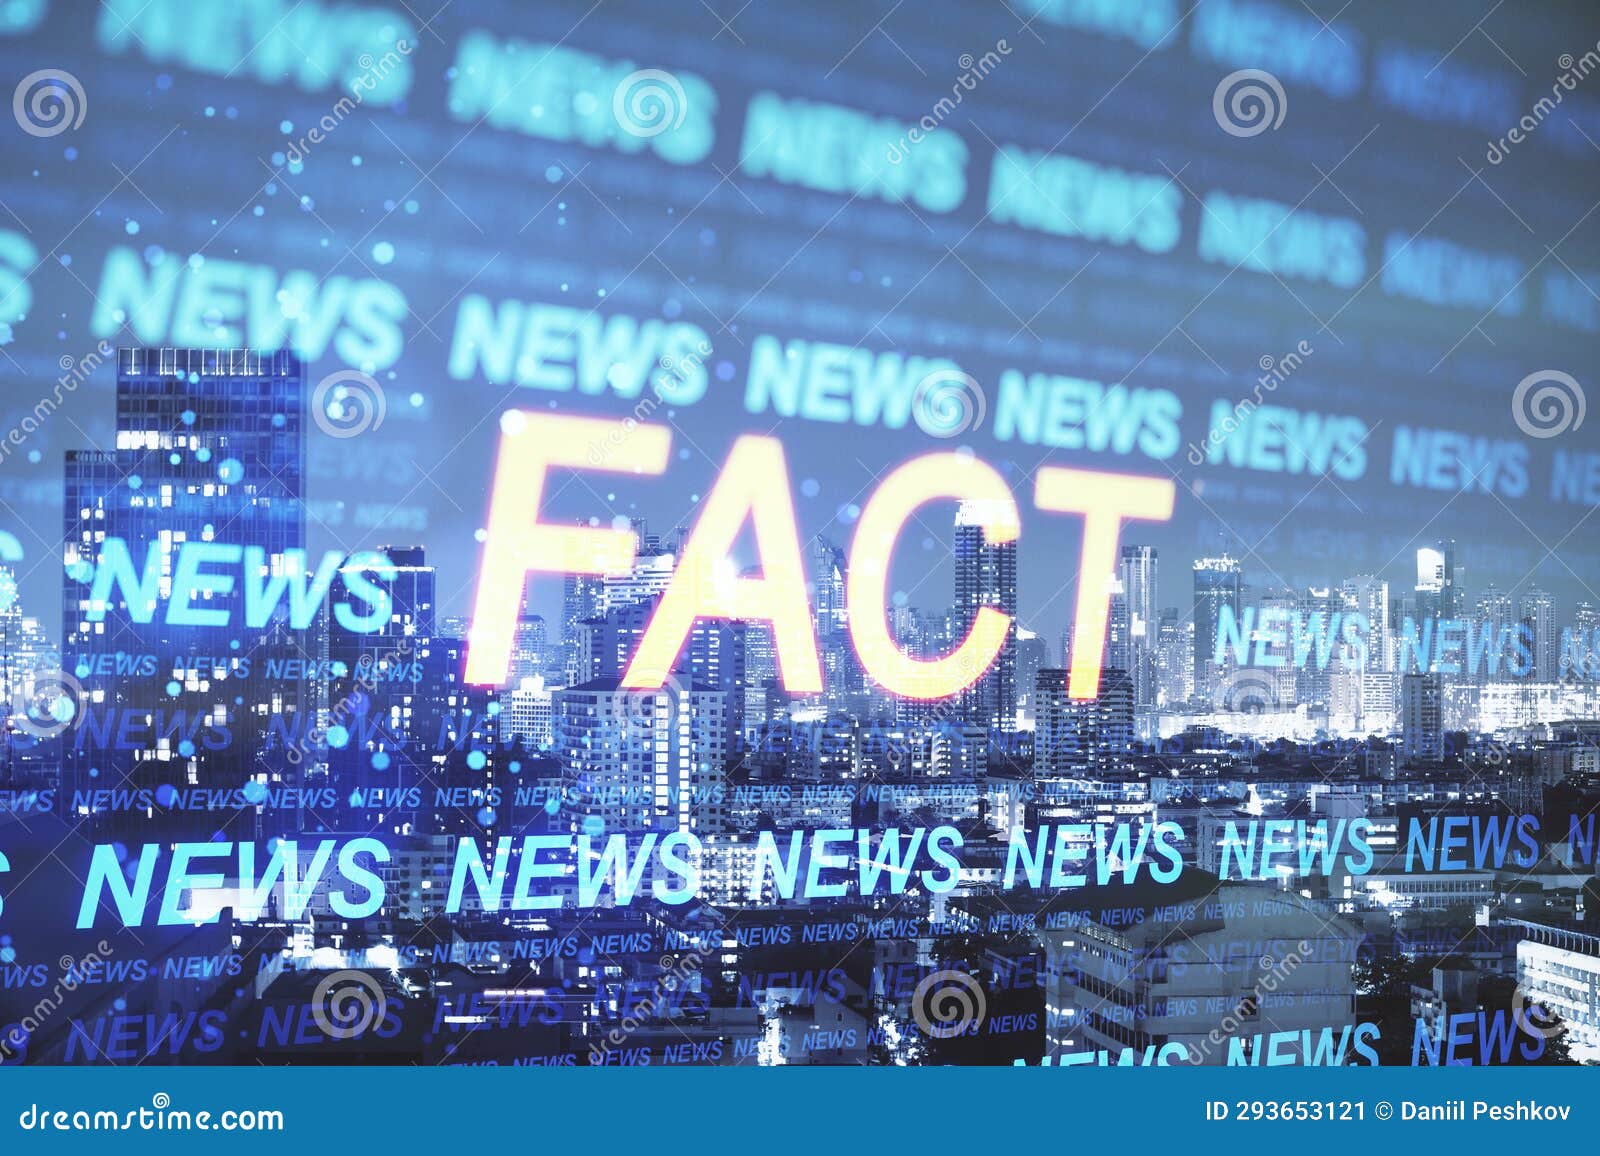 creative hi-tech news hologram on blurry city background with bright 'fact' word. television, factual news and digital